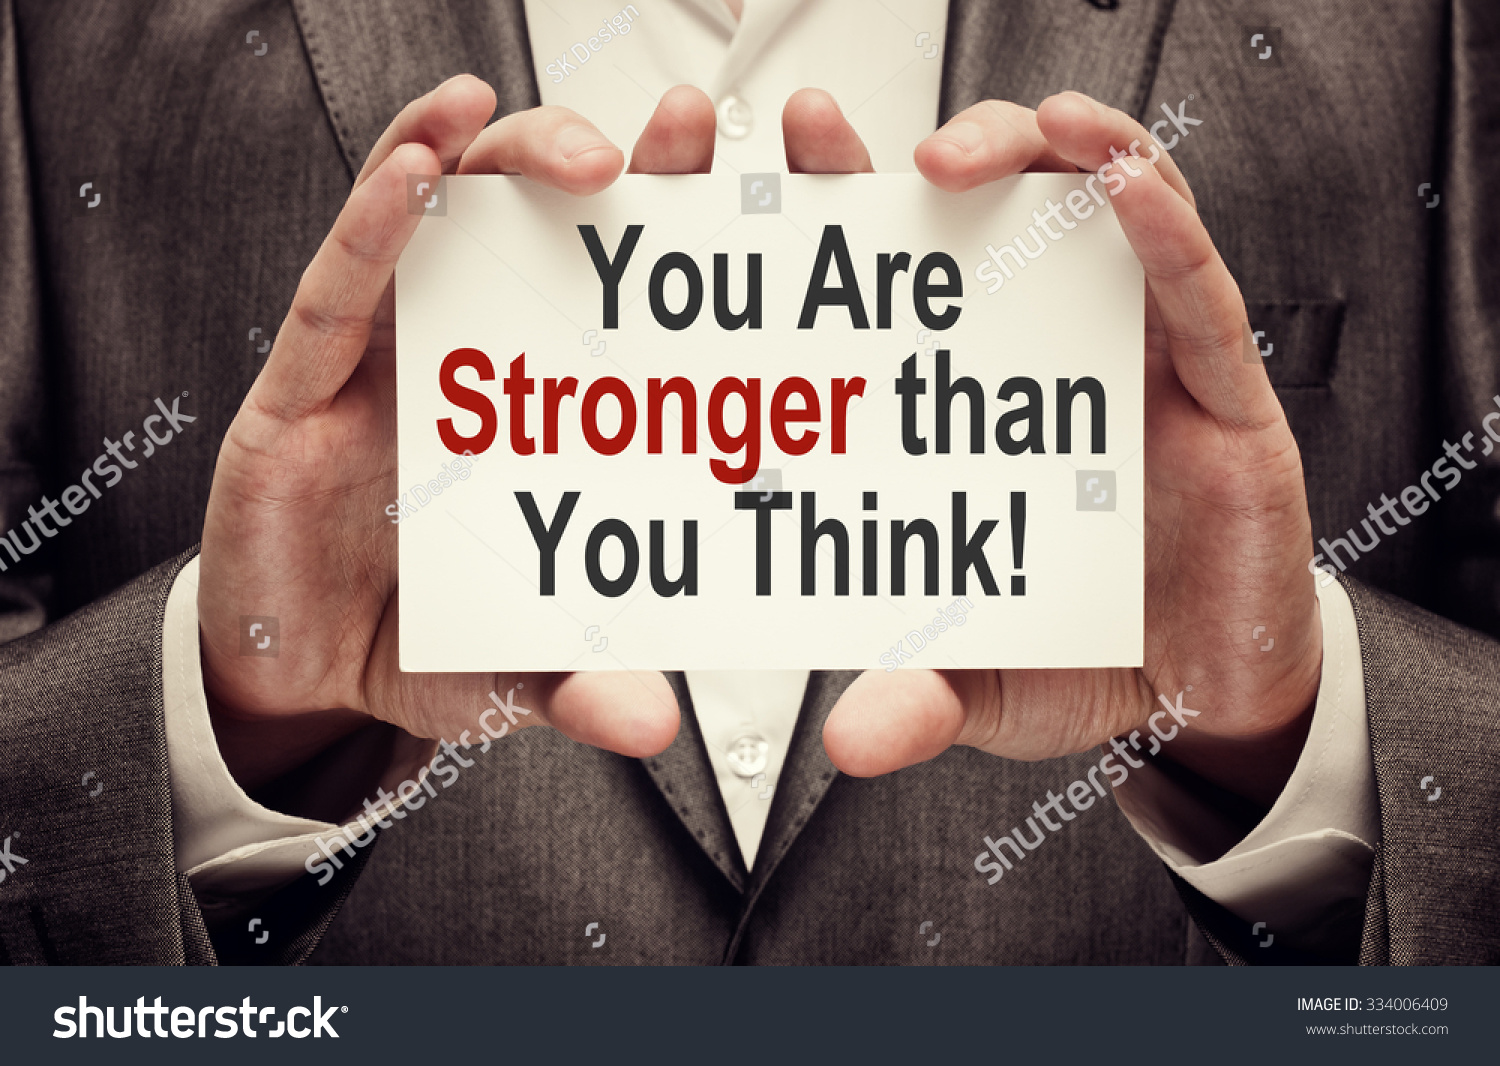 You Are Stronger Than You Think ! Motivational Message written on a card in hands of a businessman #334006409